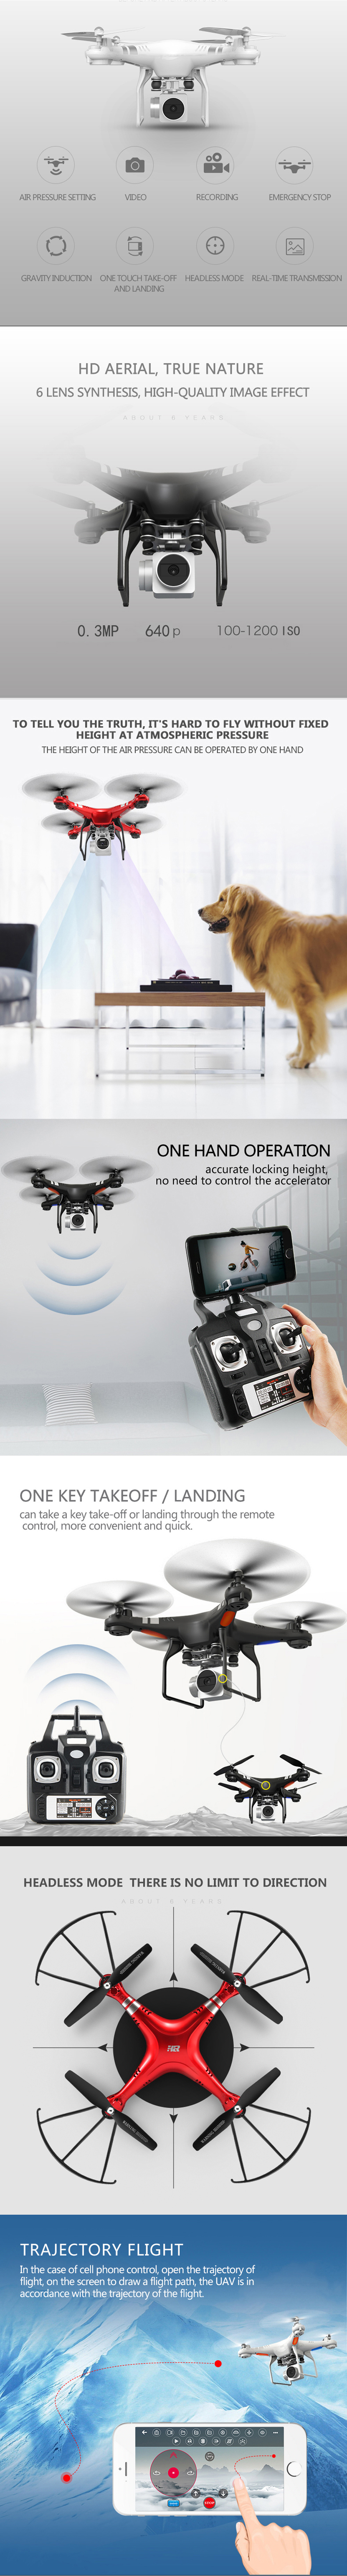 RC Drone with 0.3MP HD WiFi Camera / Height Holding / One Key Mode